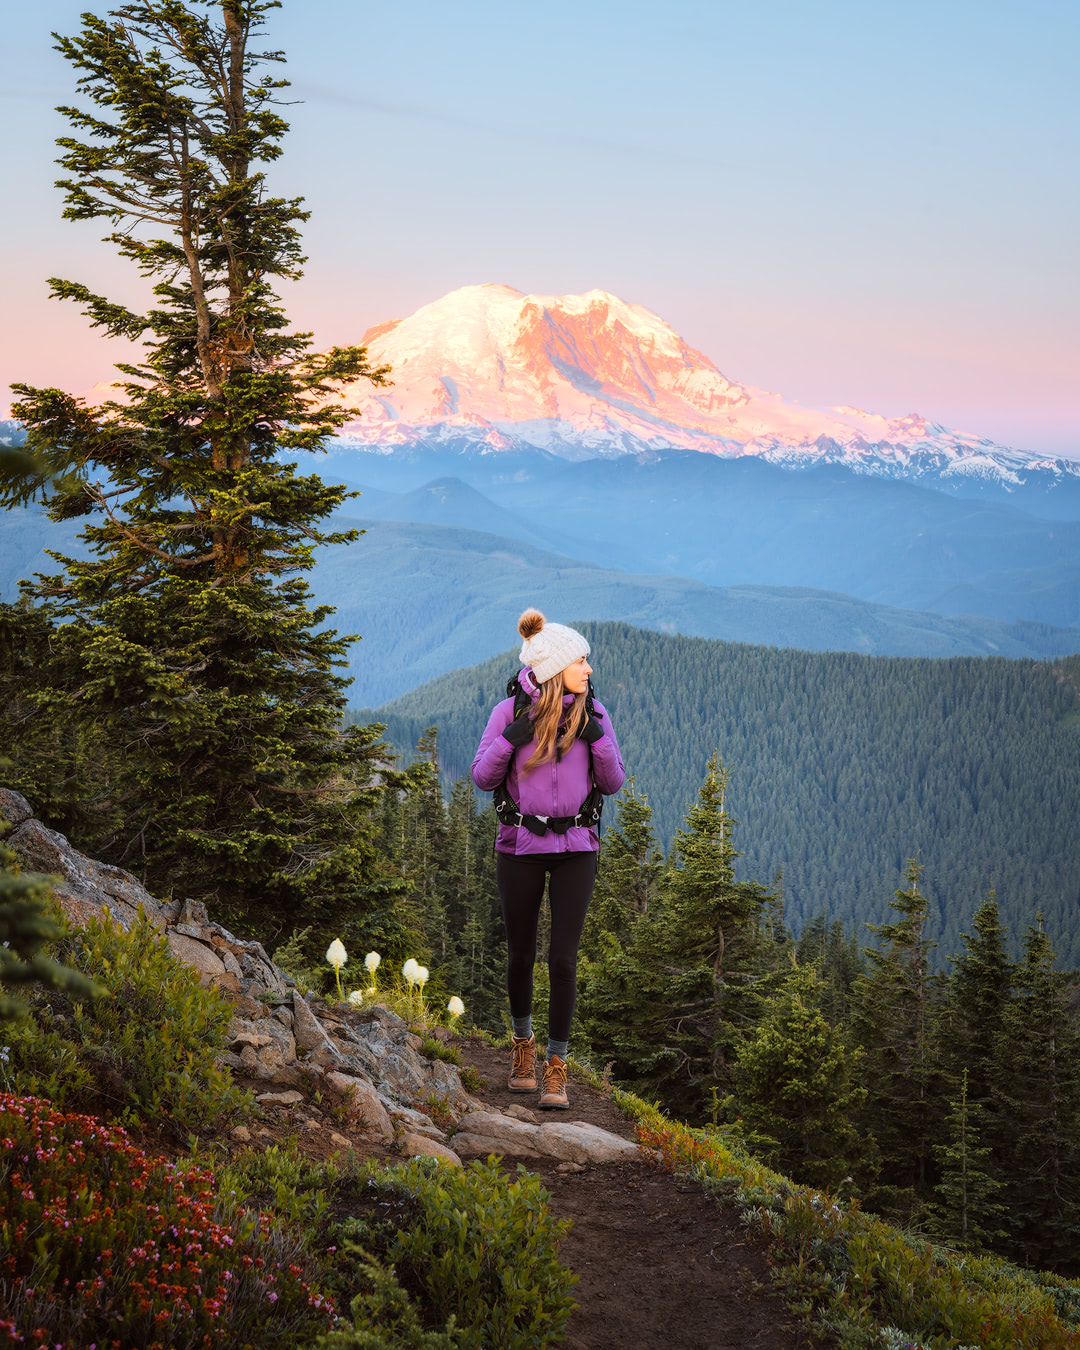 How To Get Over Your Fears of First Time Backcountry Camping - Mount Rainier